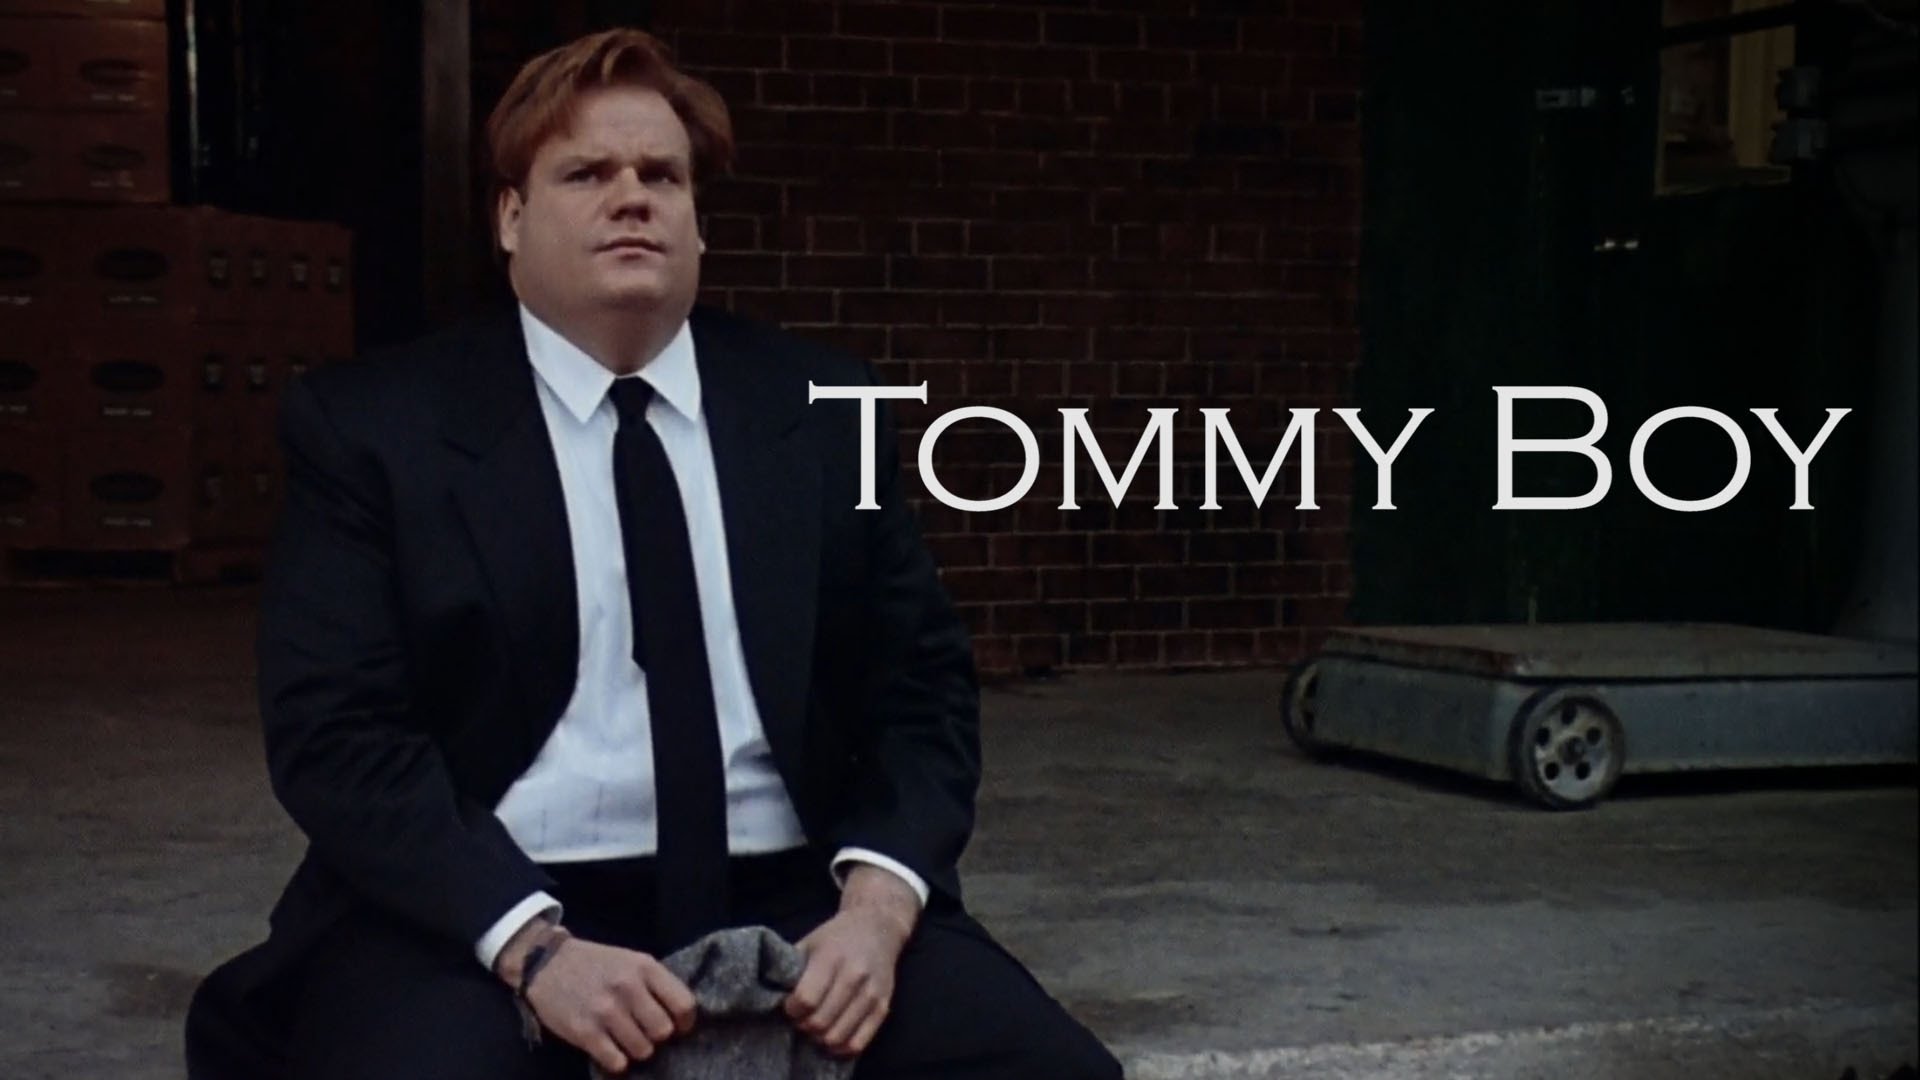 Tommy Boy Reimagined as a Heartwrenching Drama